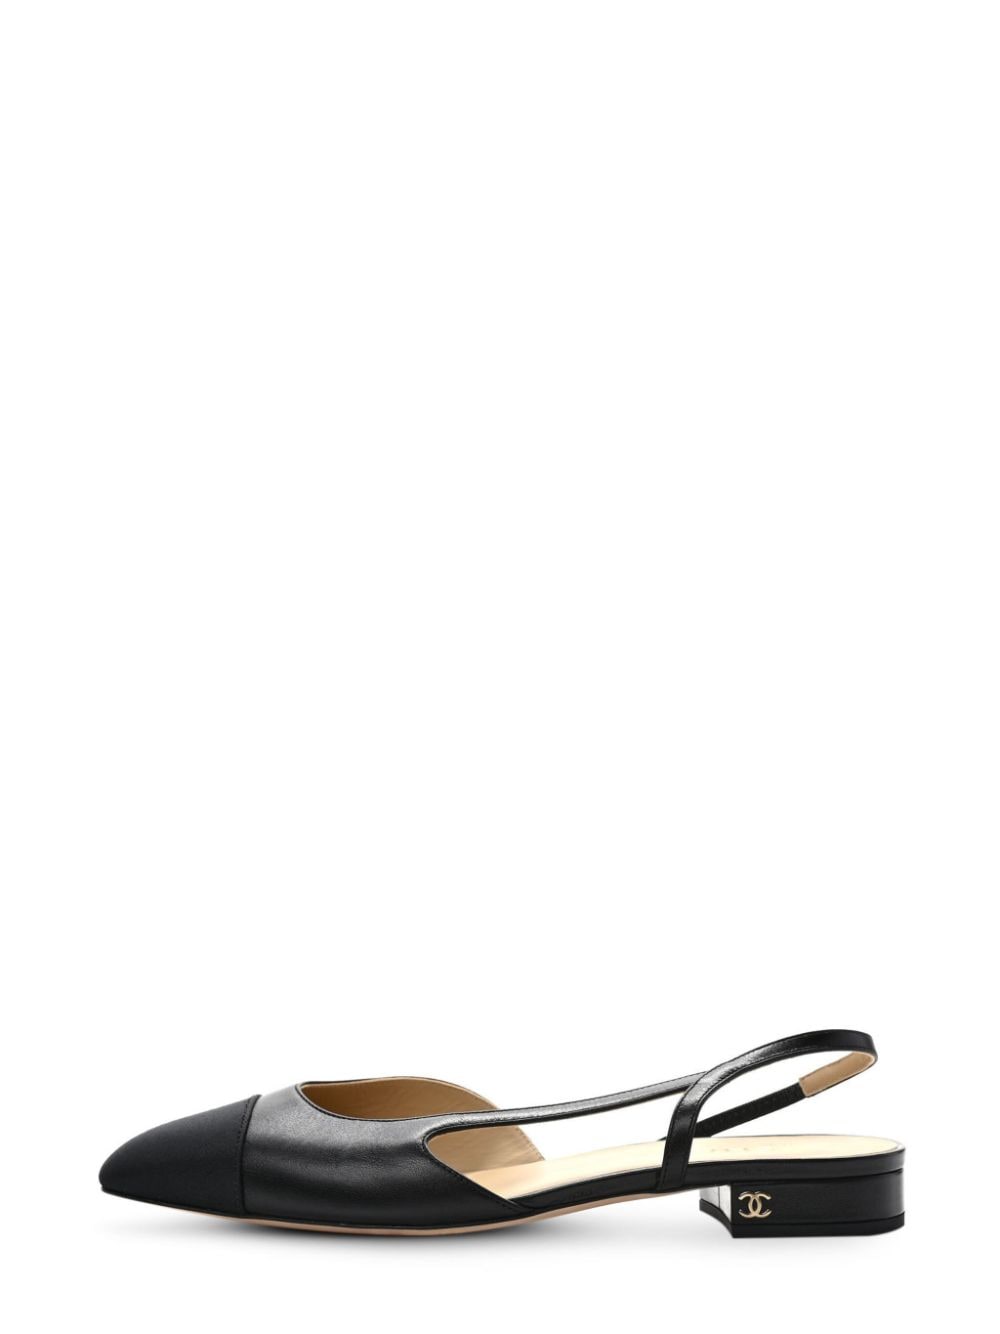 CHANEL Pre-Owned slingback leather ballerina shoes - Black